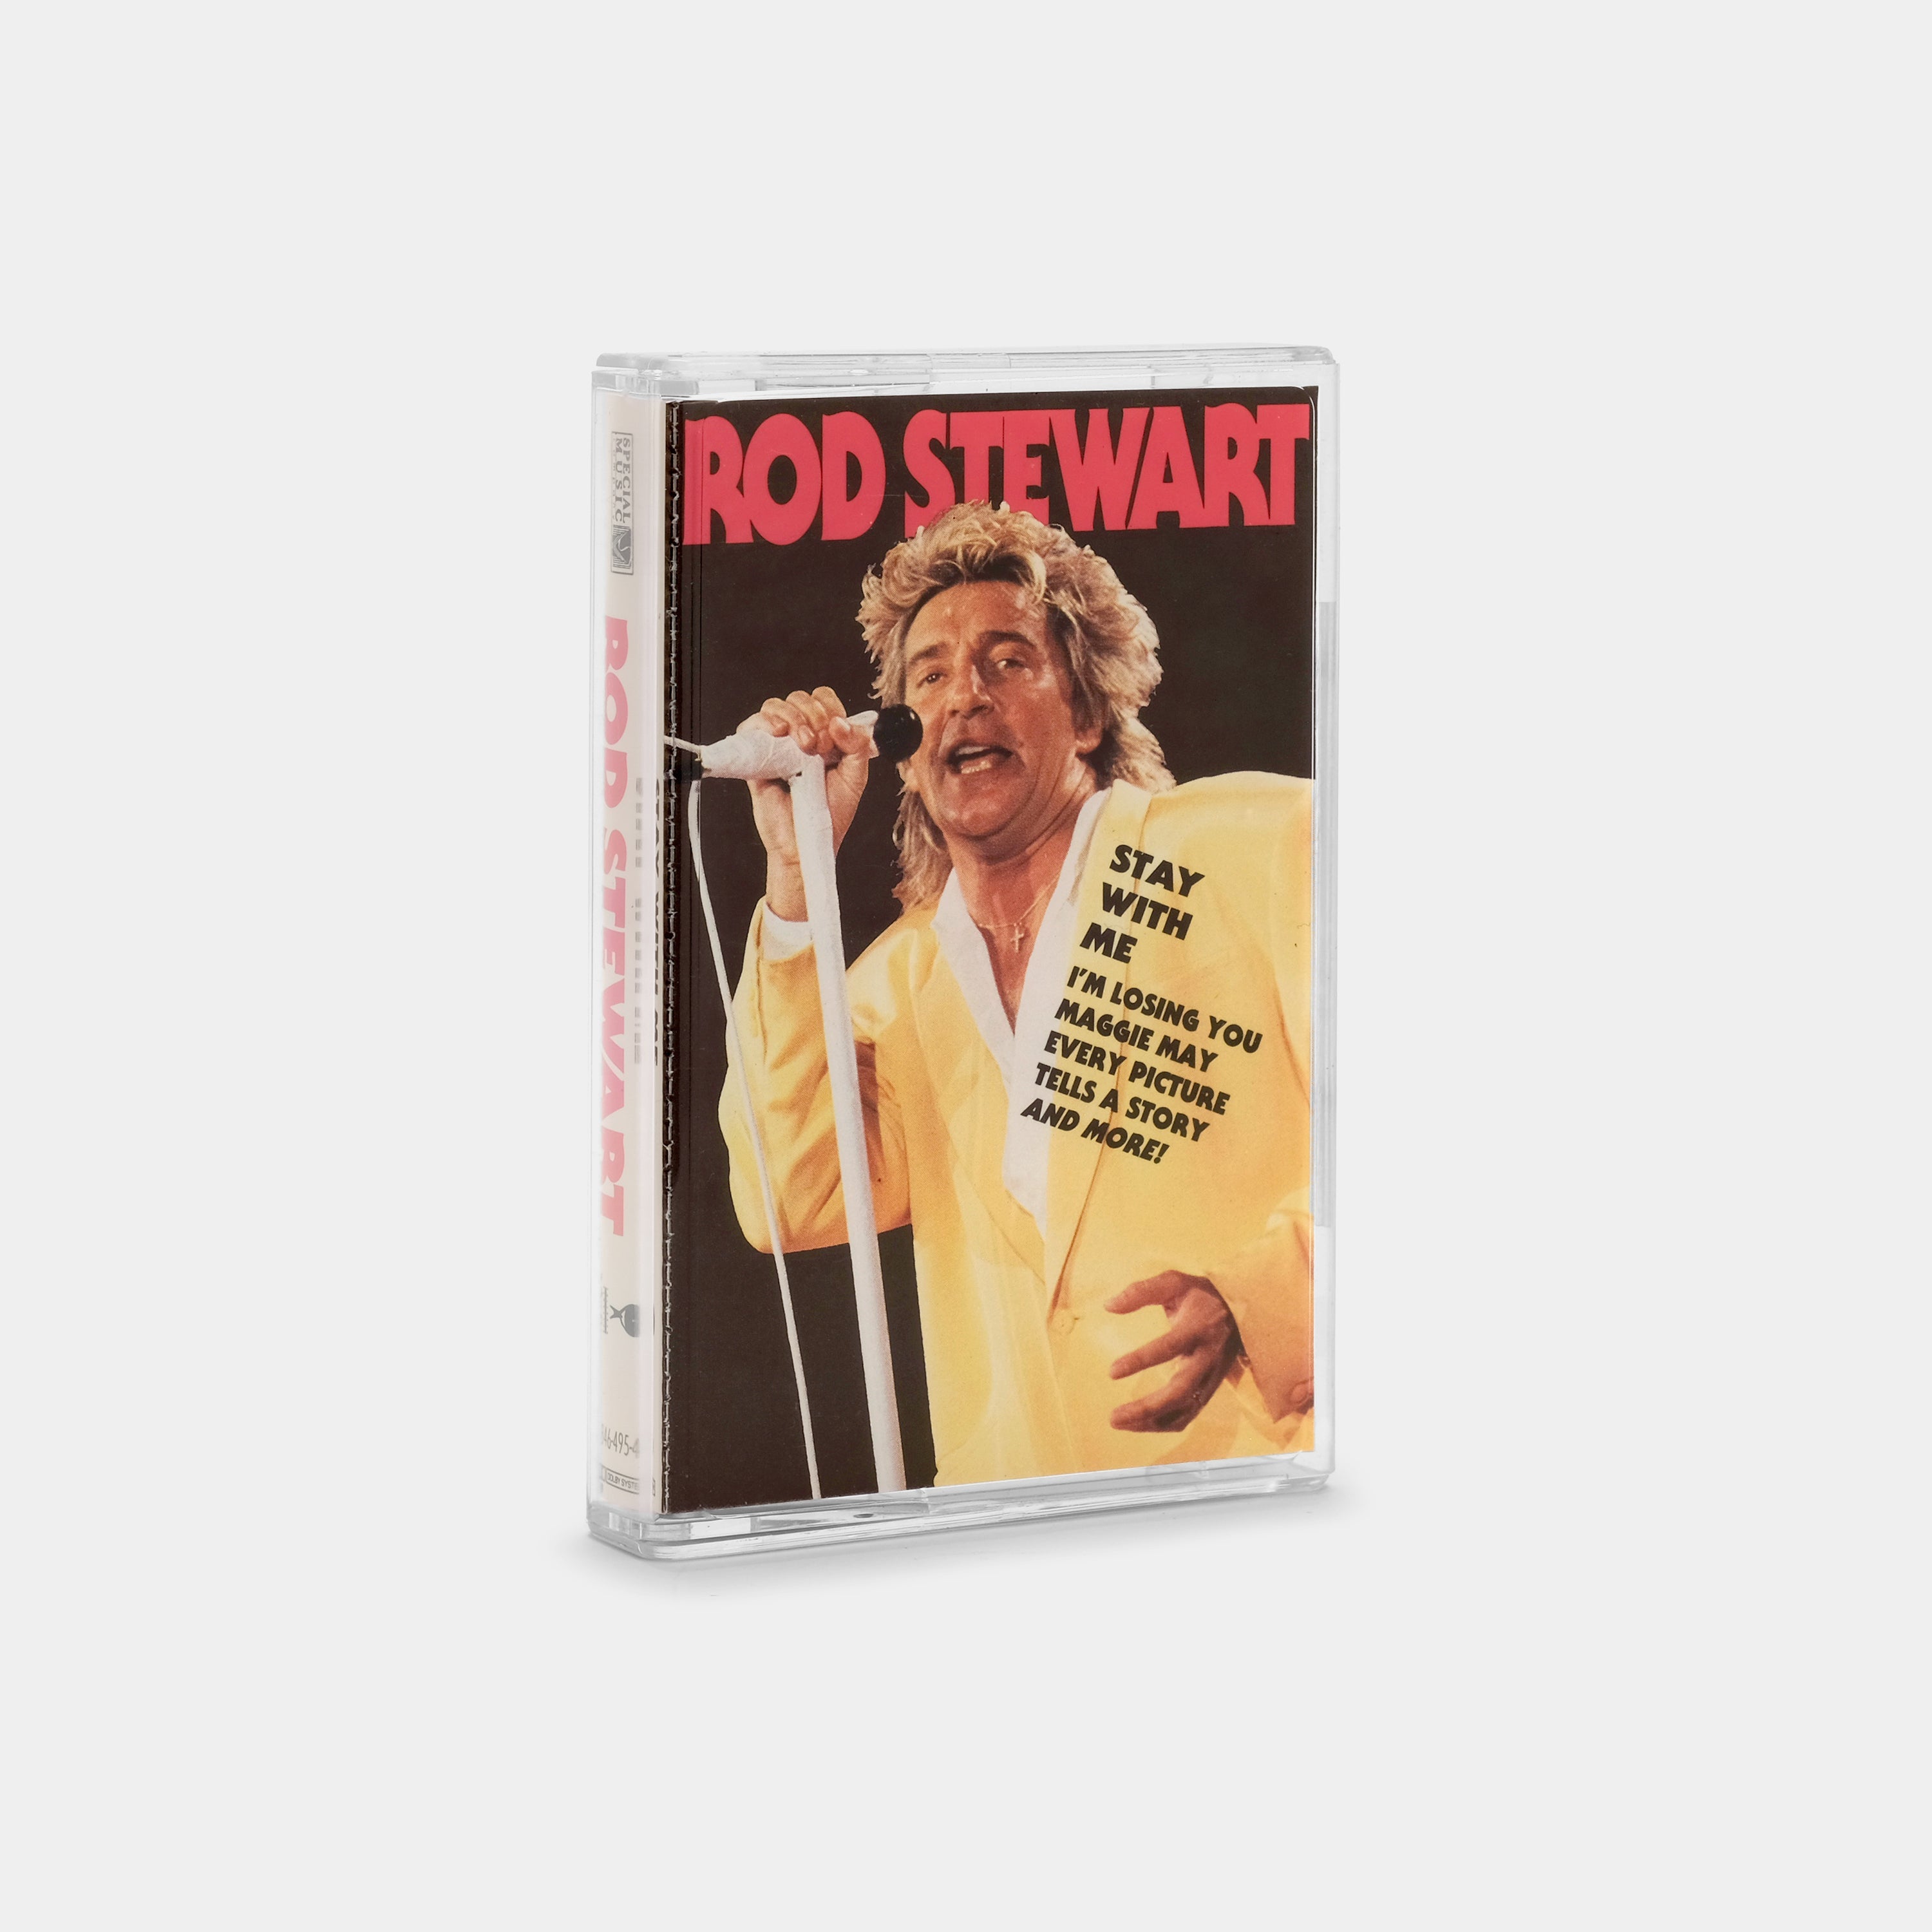 Rod Stewart - Stay With Me Cassette Tape